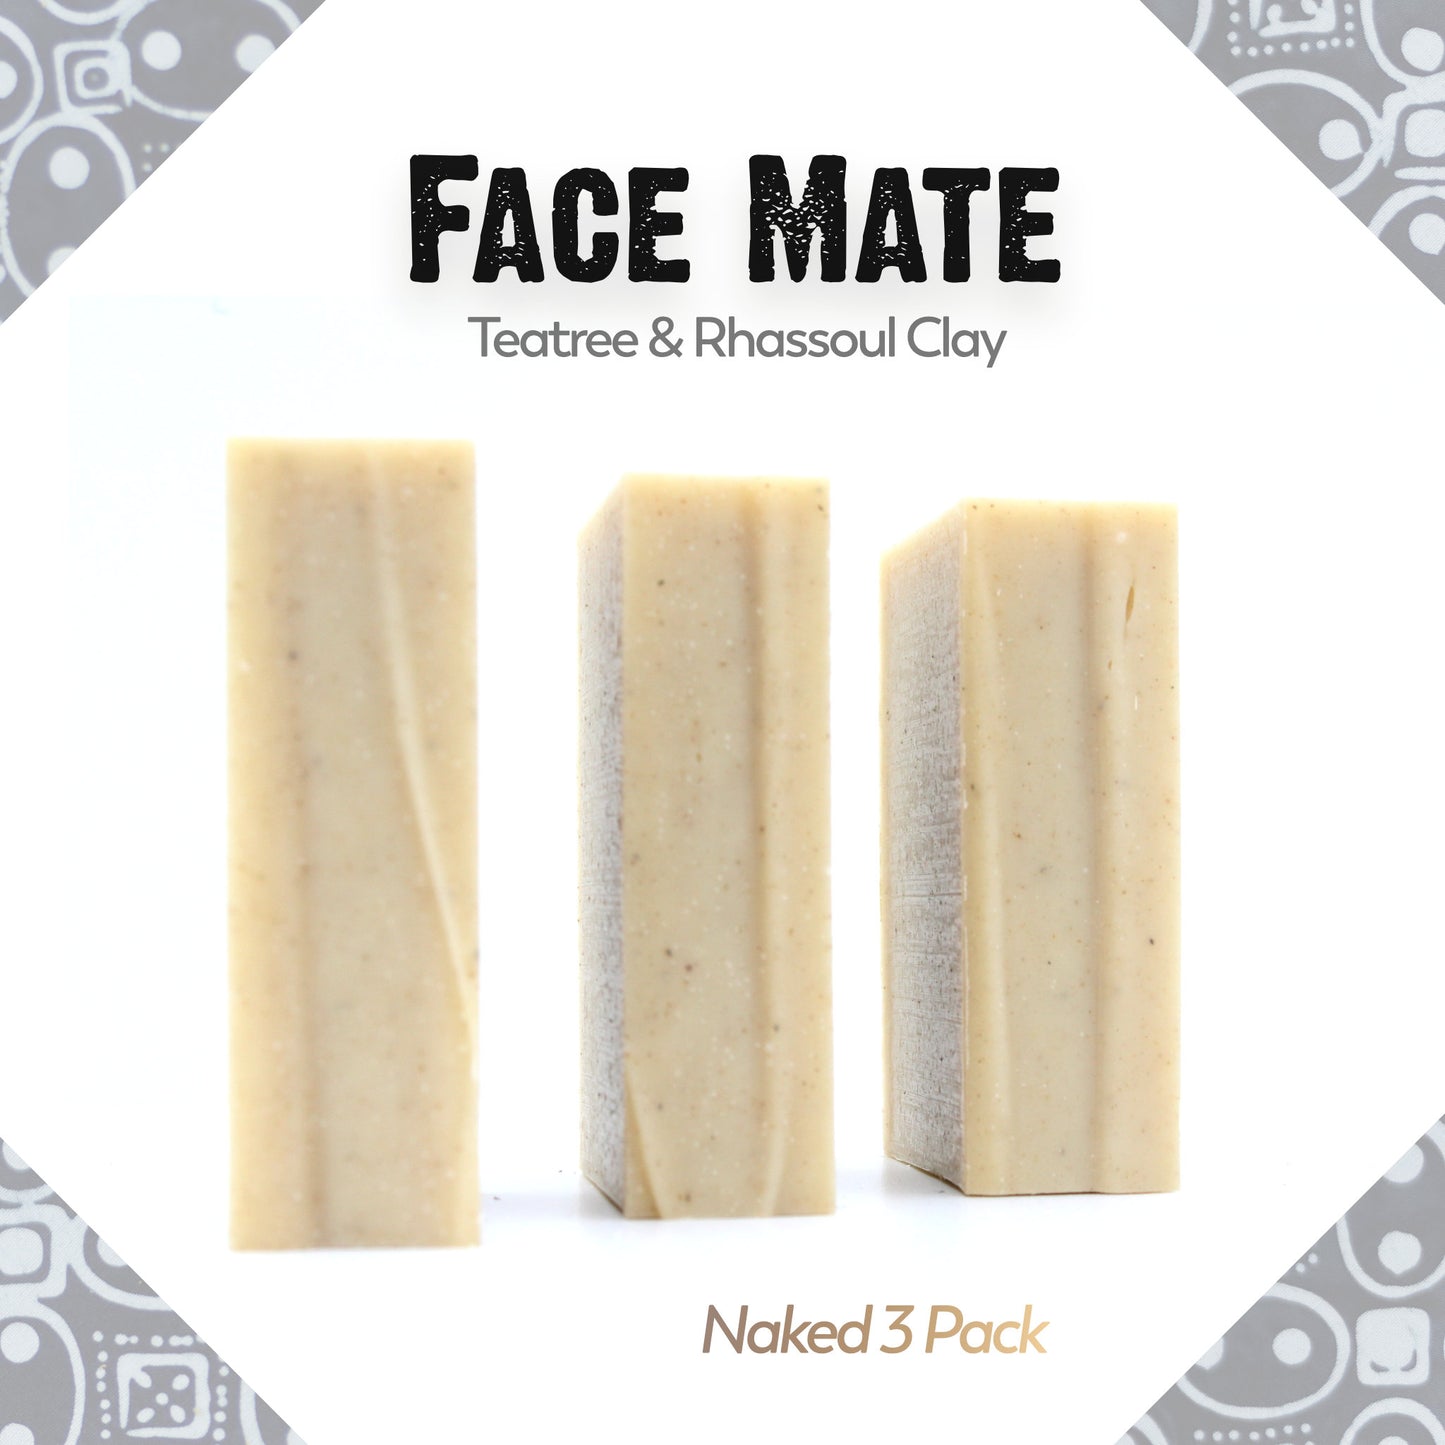 Naked three pack of Face Mate Teatree essential oil and rhassoul clay organic bar soap from ground Soap. 